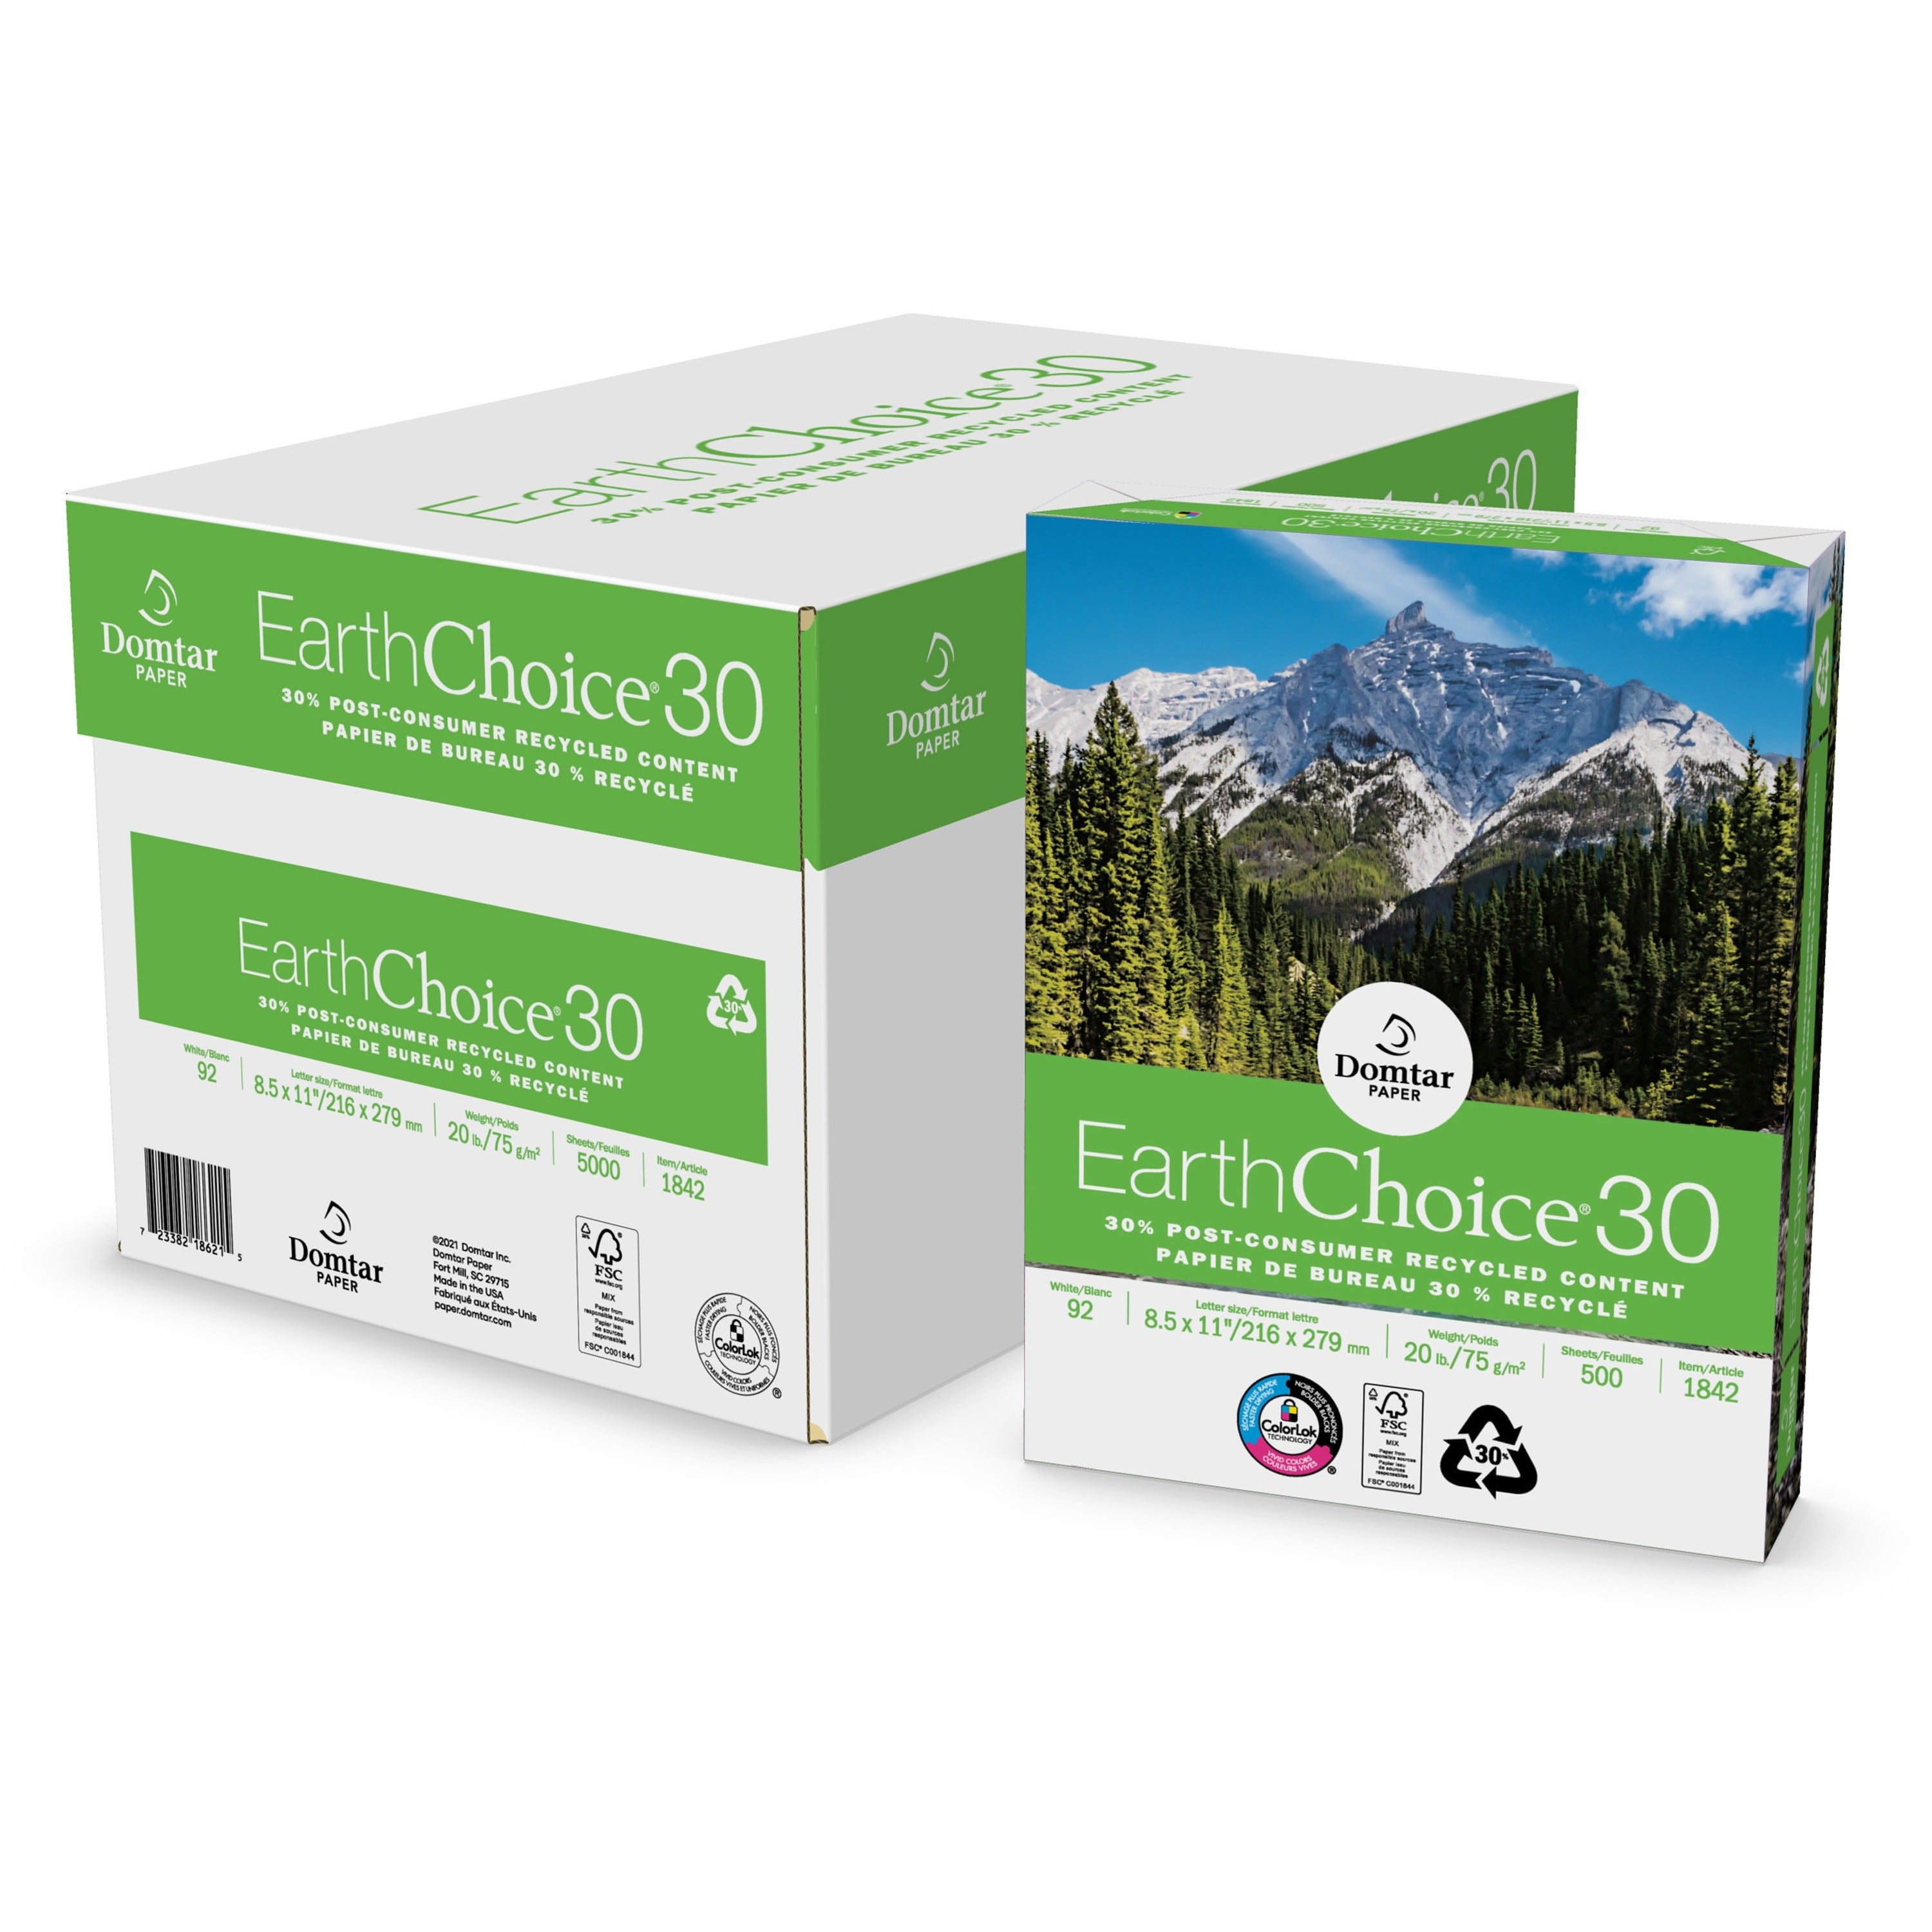 Domtar EarthChoice30 Recycled Office Paper - 92 Brightness - 88% Opacity - Letter - 8 1/2" x 11" - 20 lb Basis Weight - 5000 / Carton - FSC - ColorLok Technology, Chlorine-free, Acid-free, Jam-free - White - 